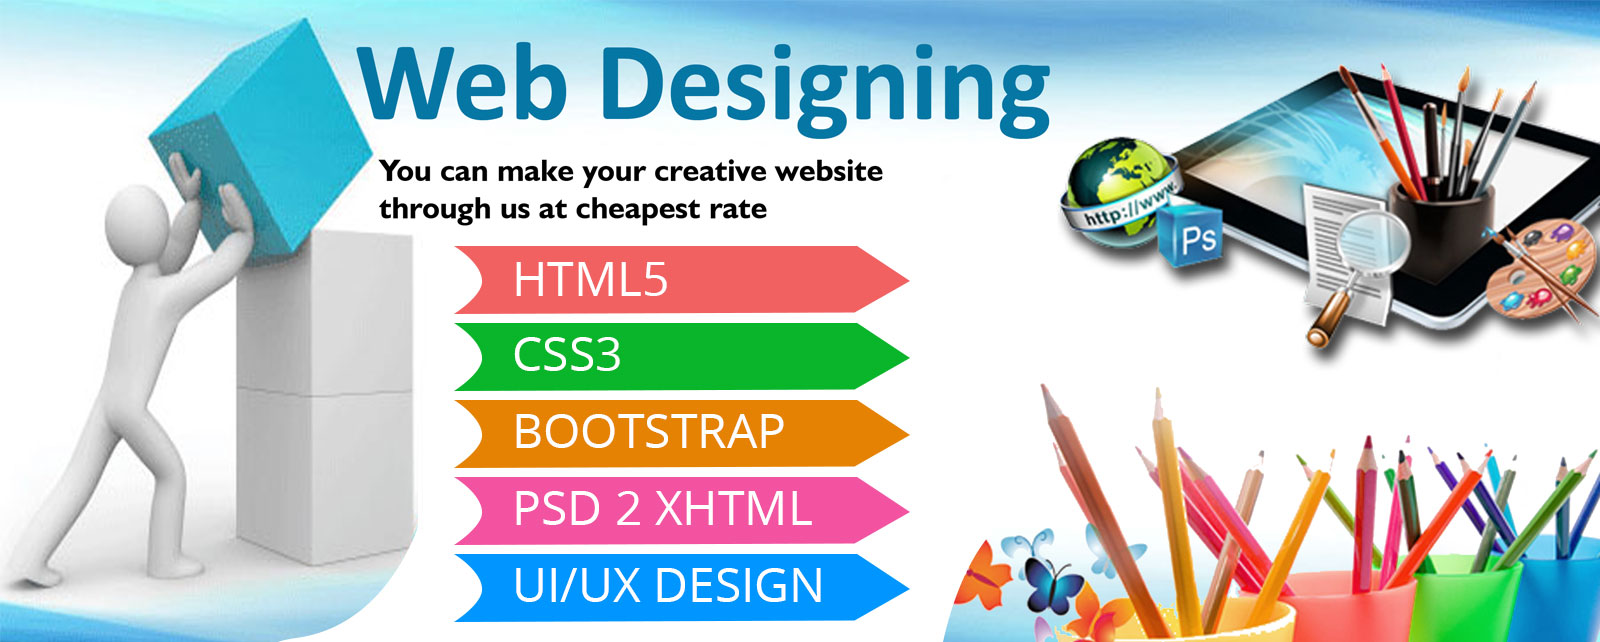 http://study.aisectonline.com/images/web designing new.jpg